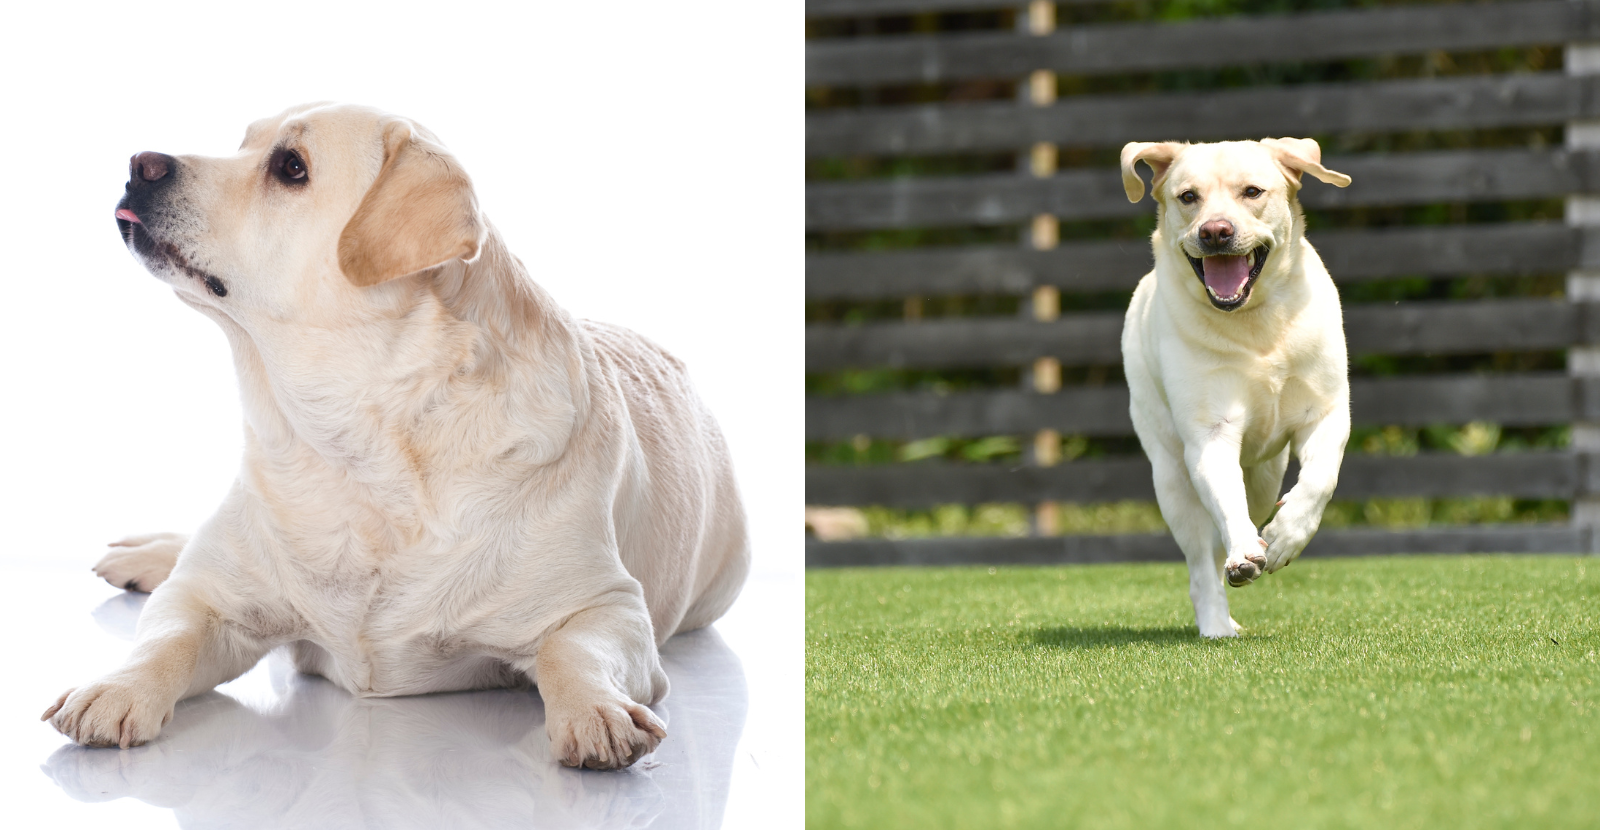 Is Your Dog Fat or Fit?